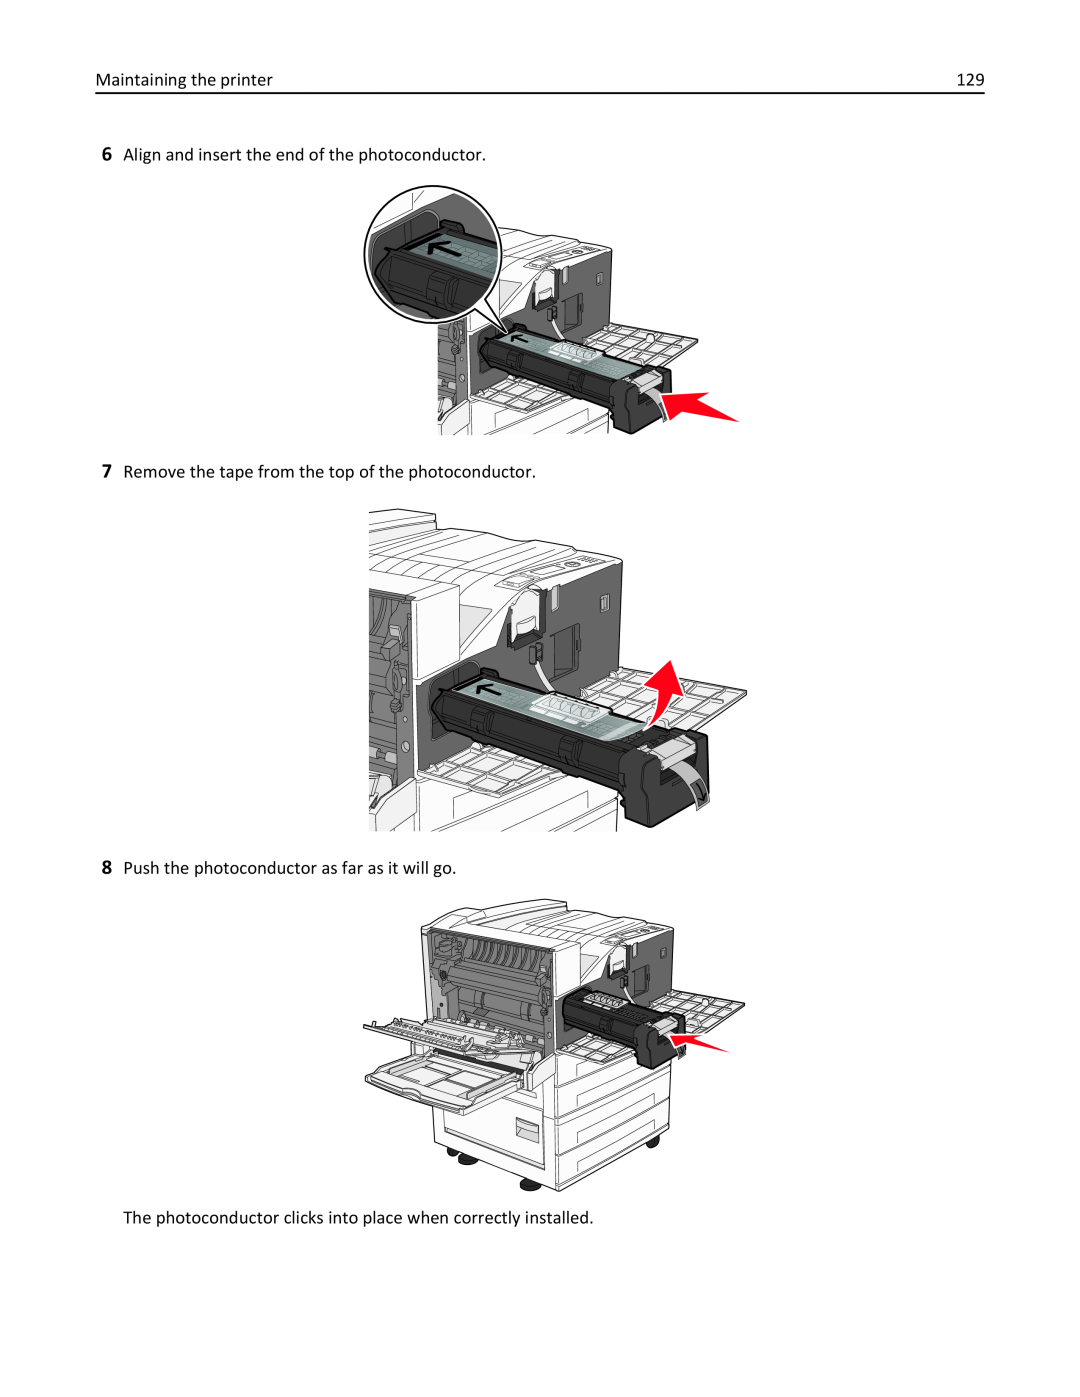 Lexmark 110, W850DN, 19Z0301 manual Maintaining the printer, Align and insert the end of the photoconductor 